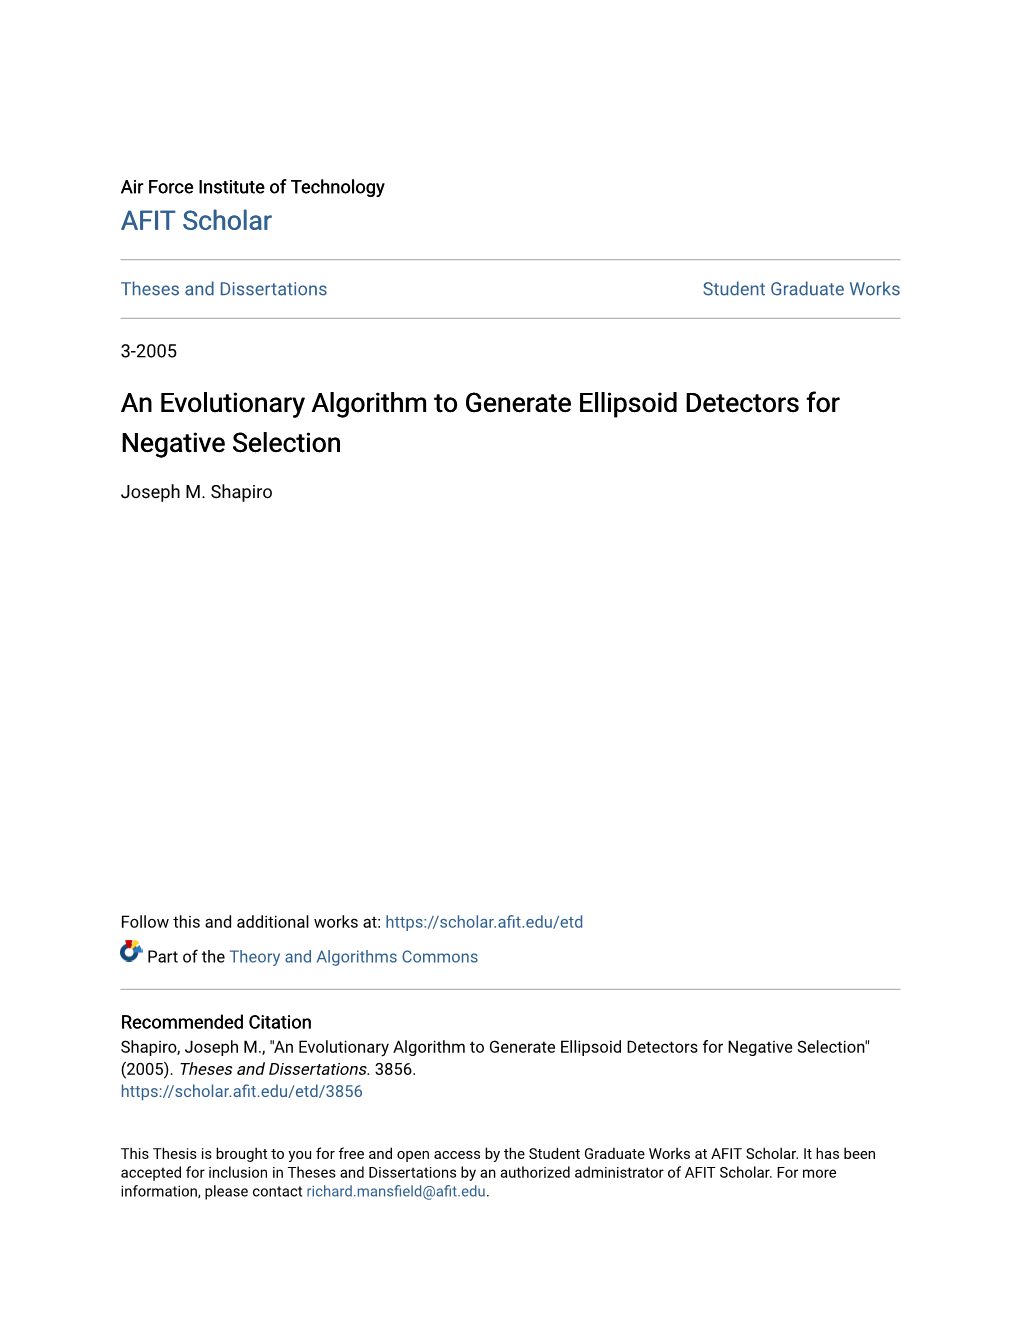 An Evolutionary Algorithm to Generate Ellipsoid Detectors for Negative Selection